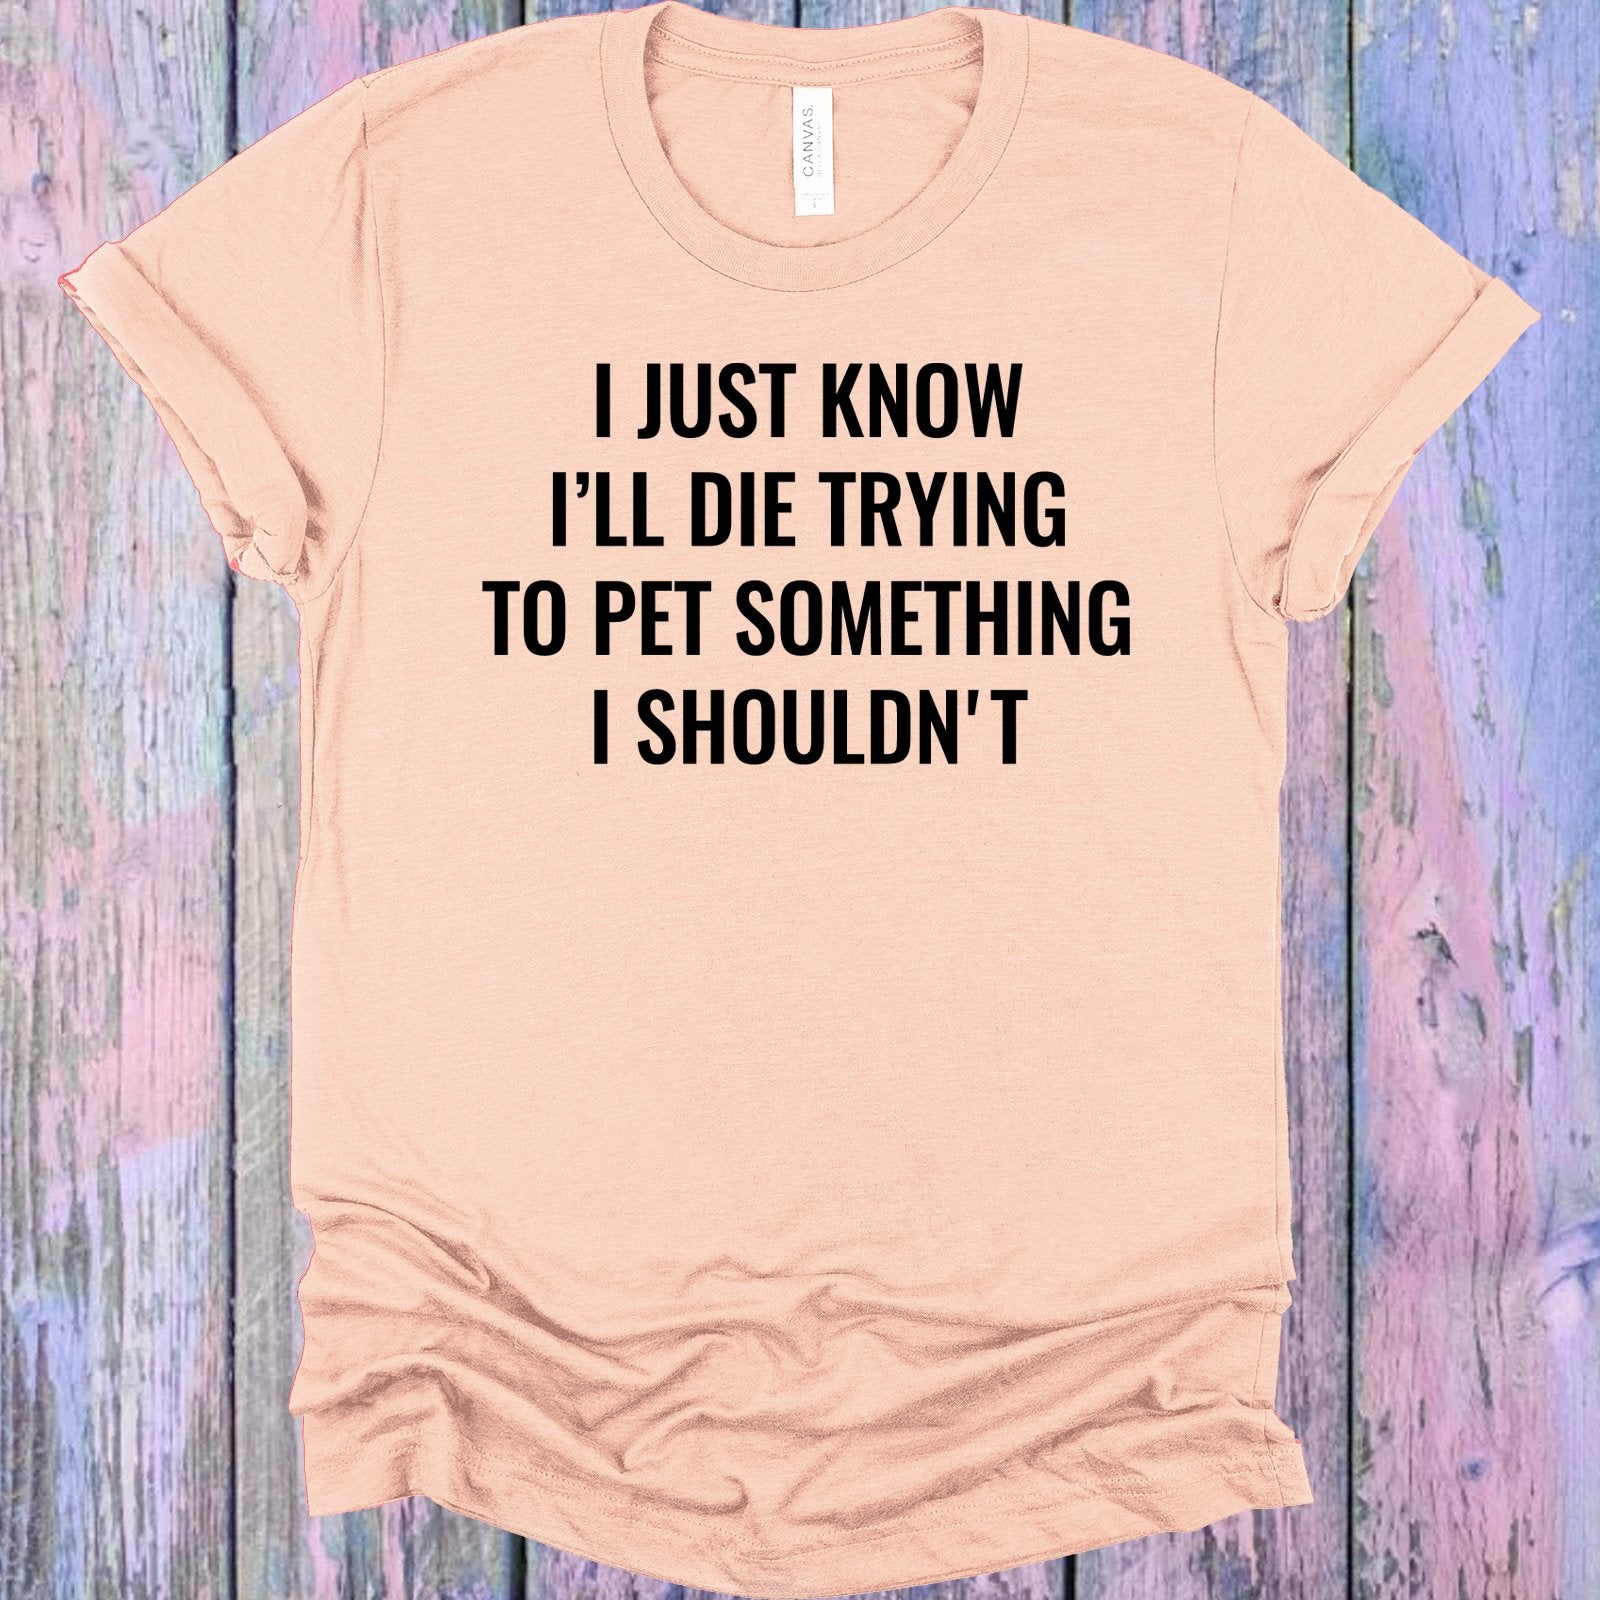 I Just Know Ill Die Trying To Pet Something Shouldnt Graphic Tee Graphic Tee